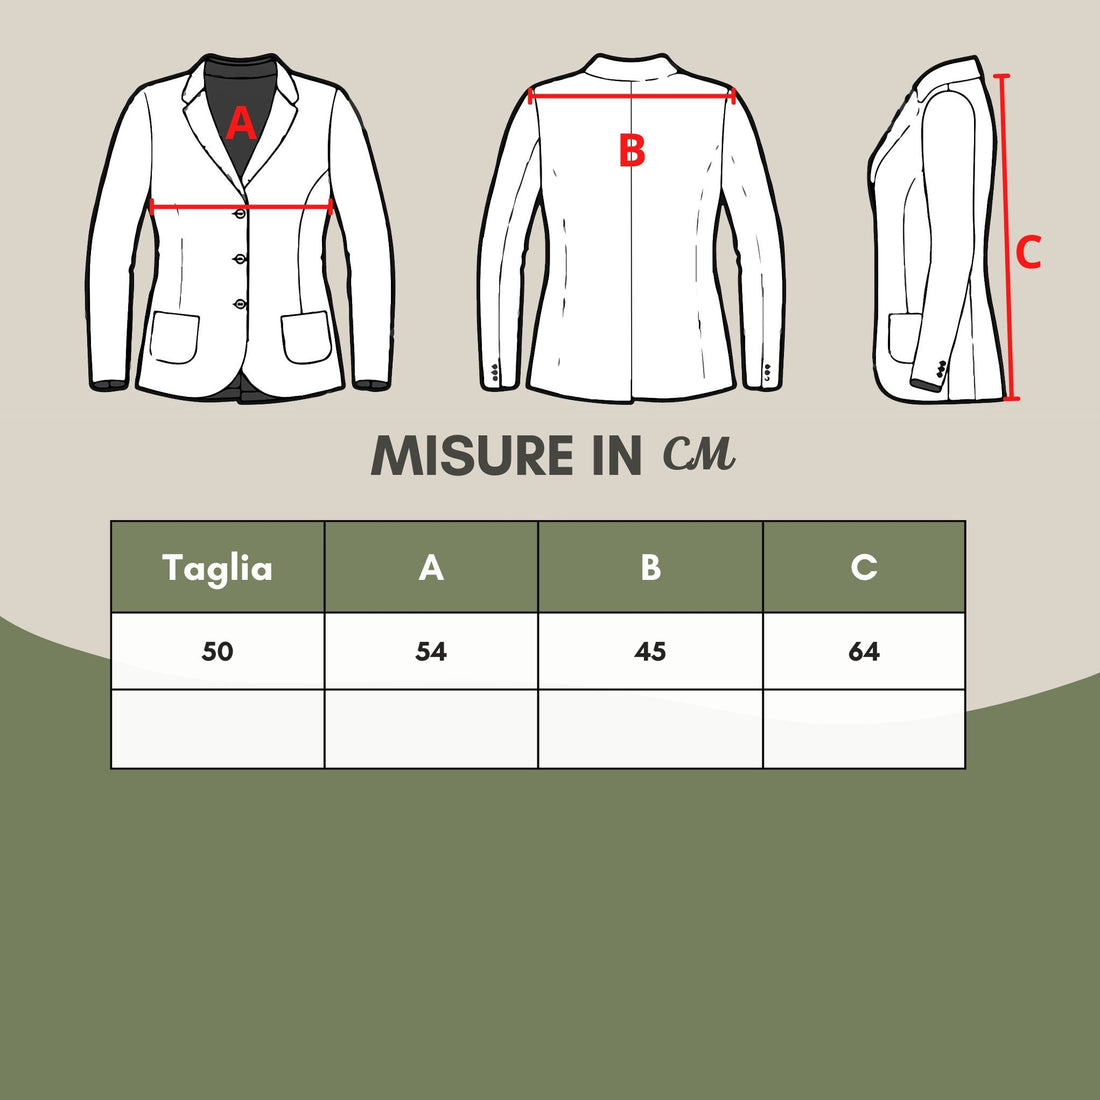 Sealup Ice White Slim Fit Technical Jacket